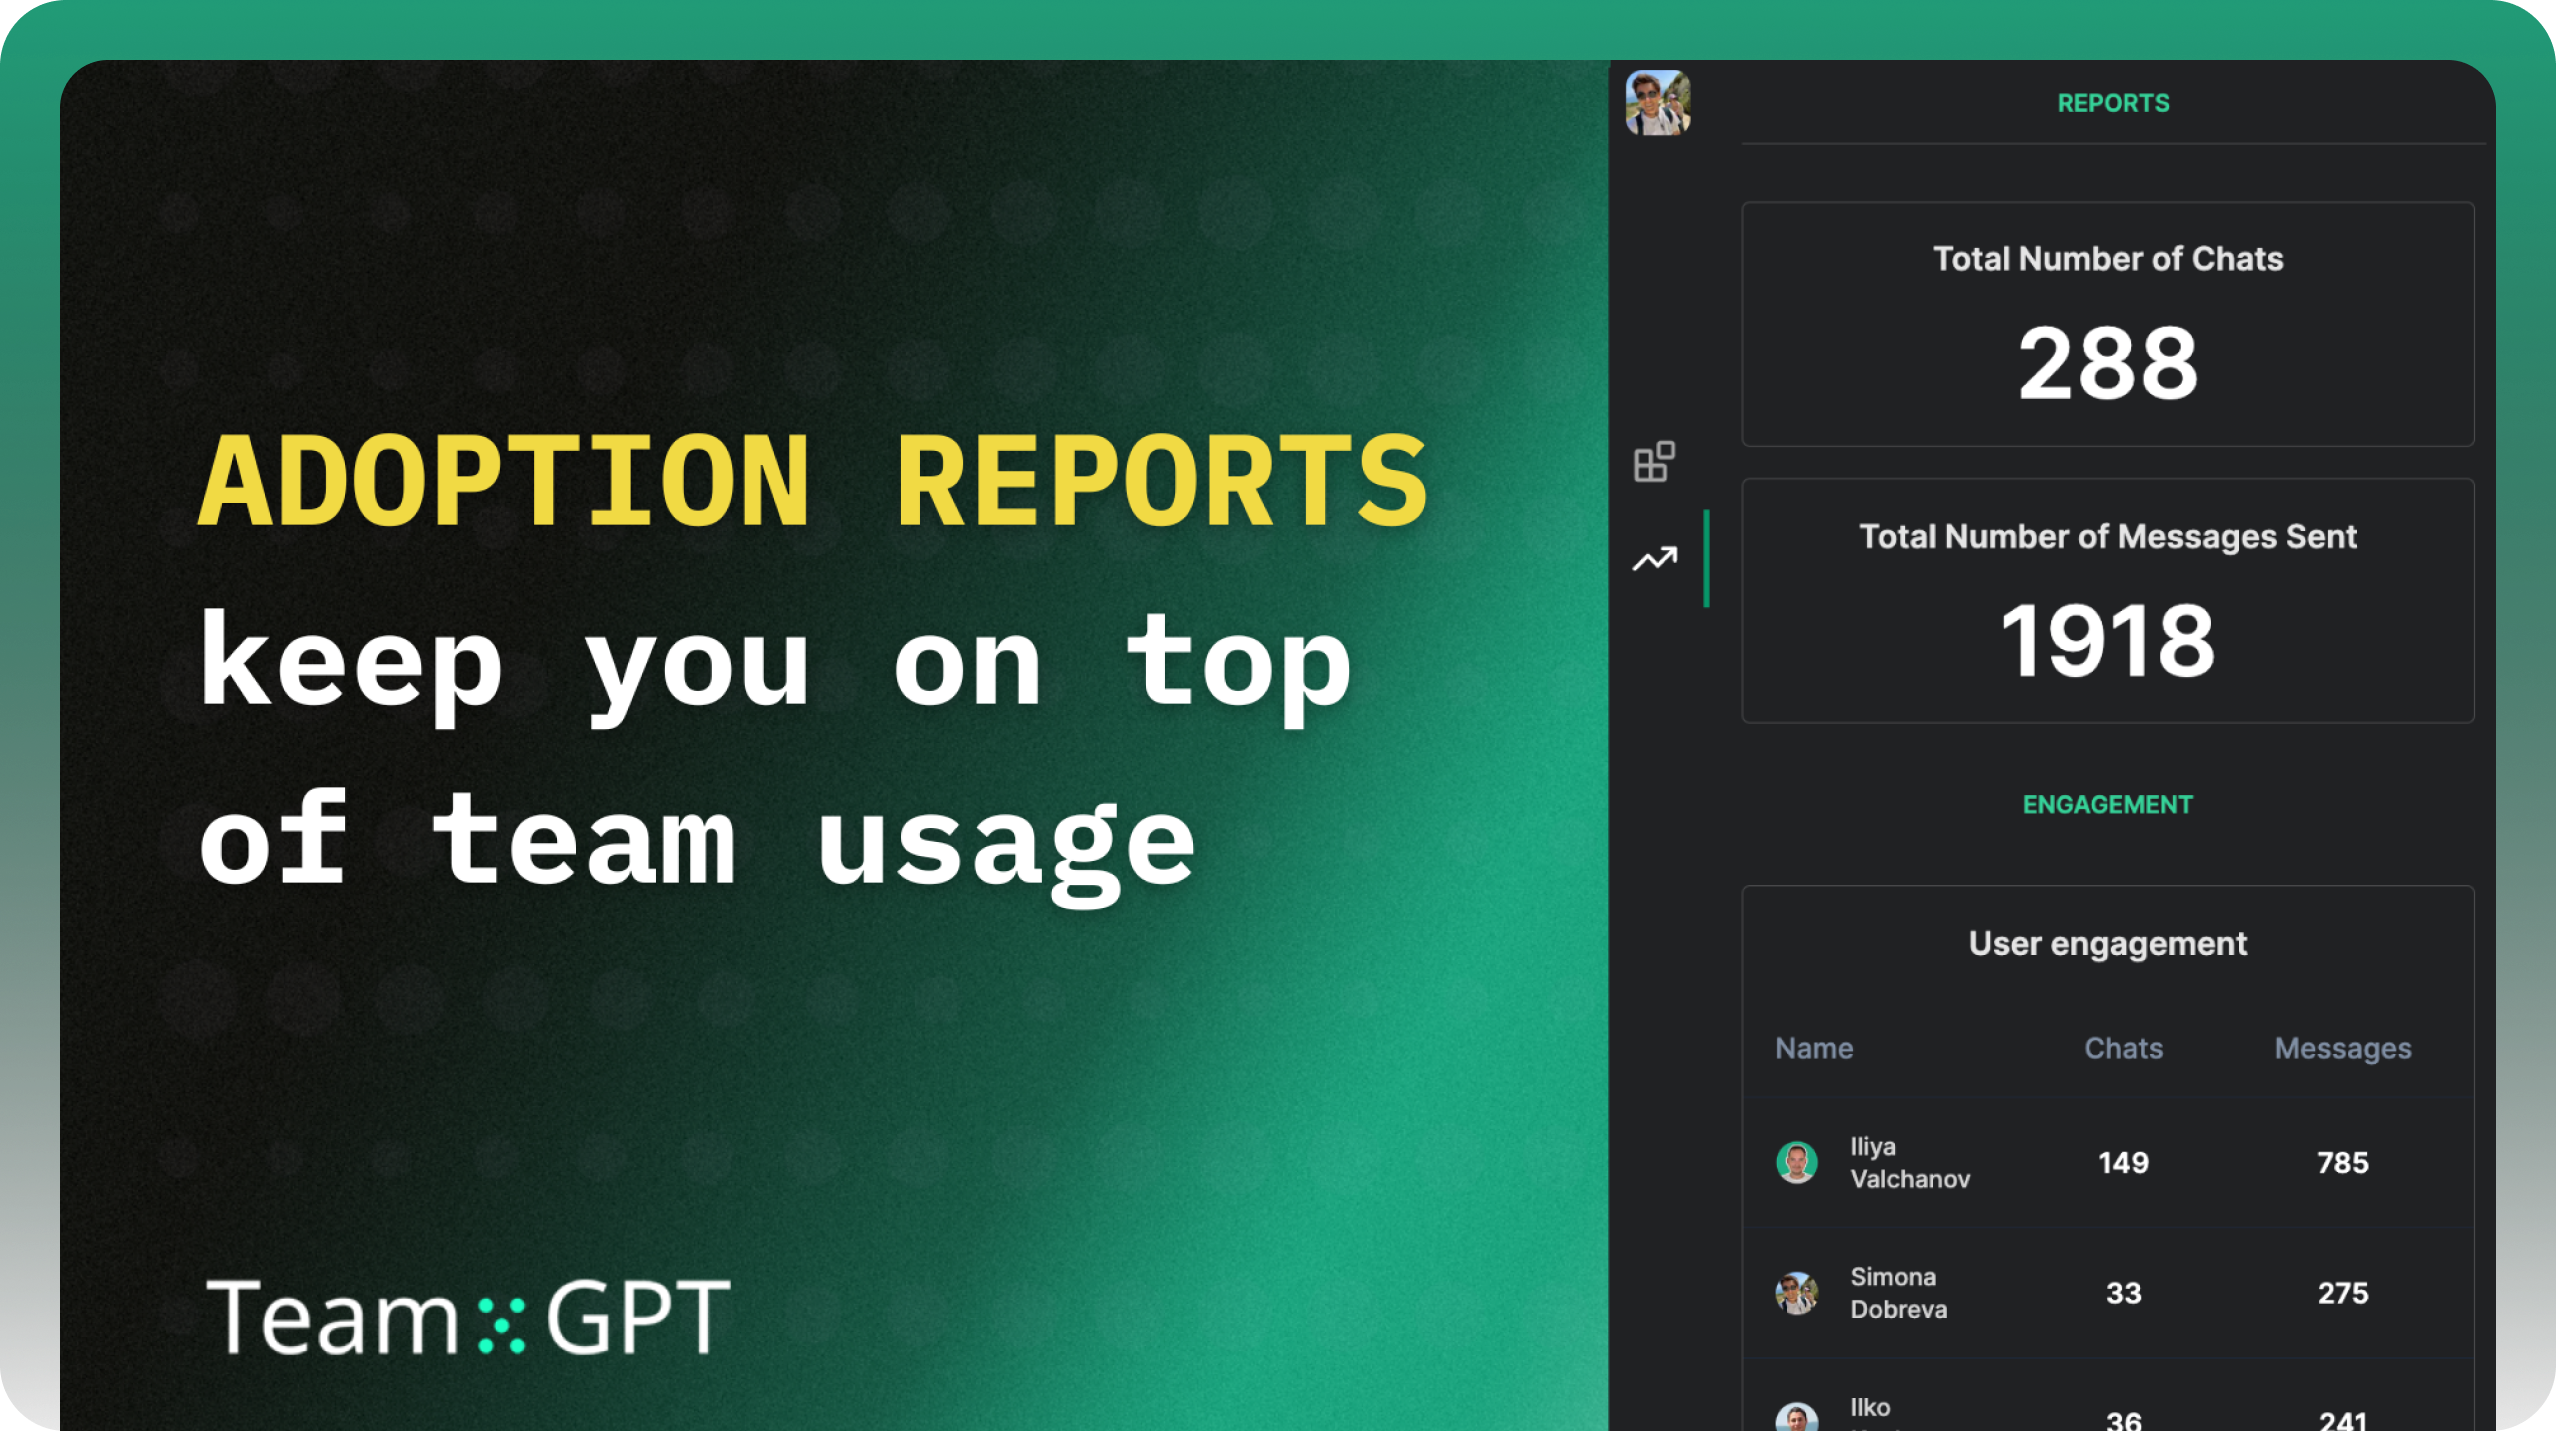 Adoption Reports for ChatGPT usage